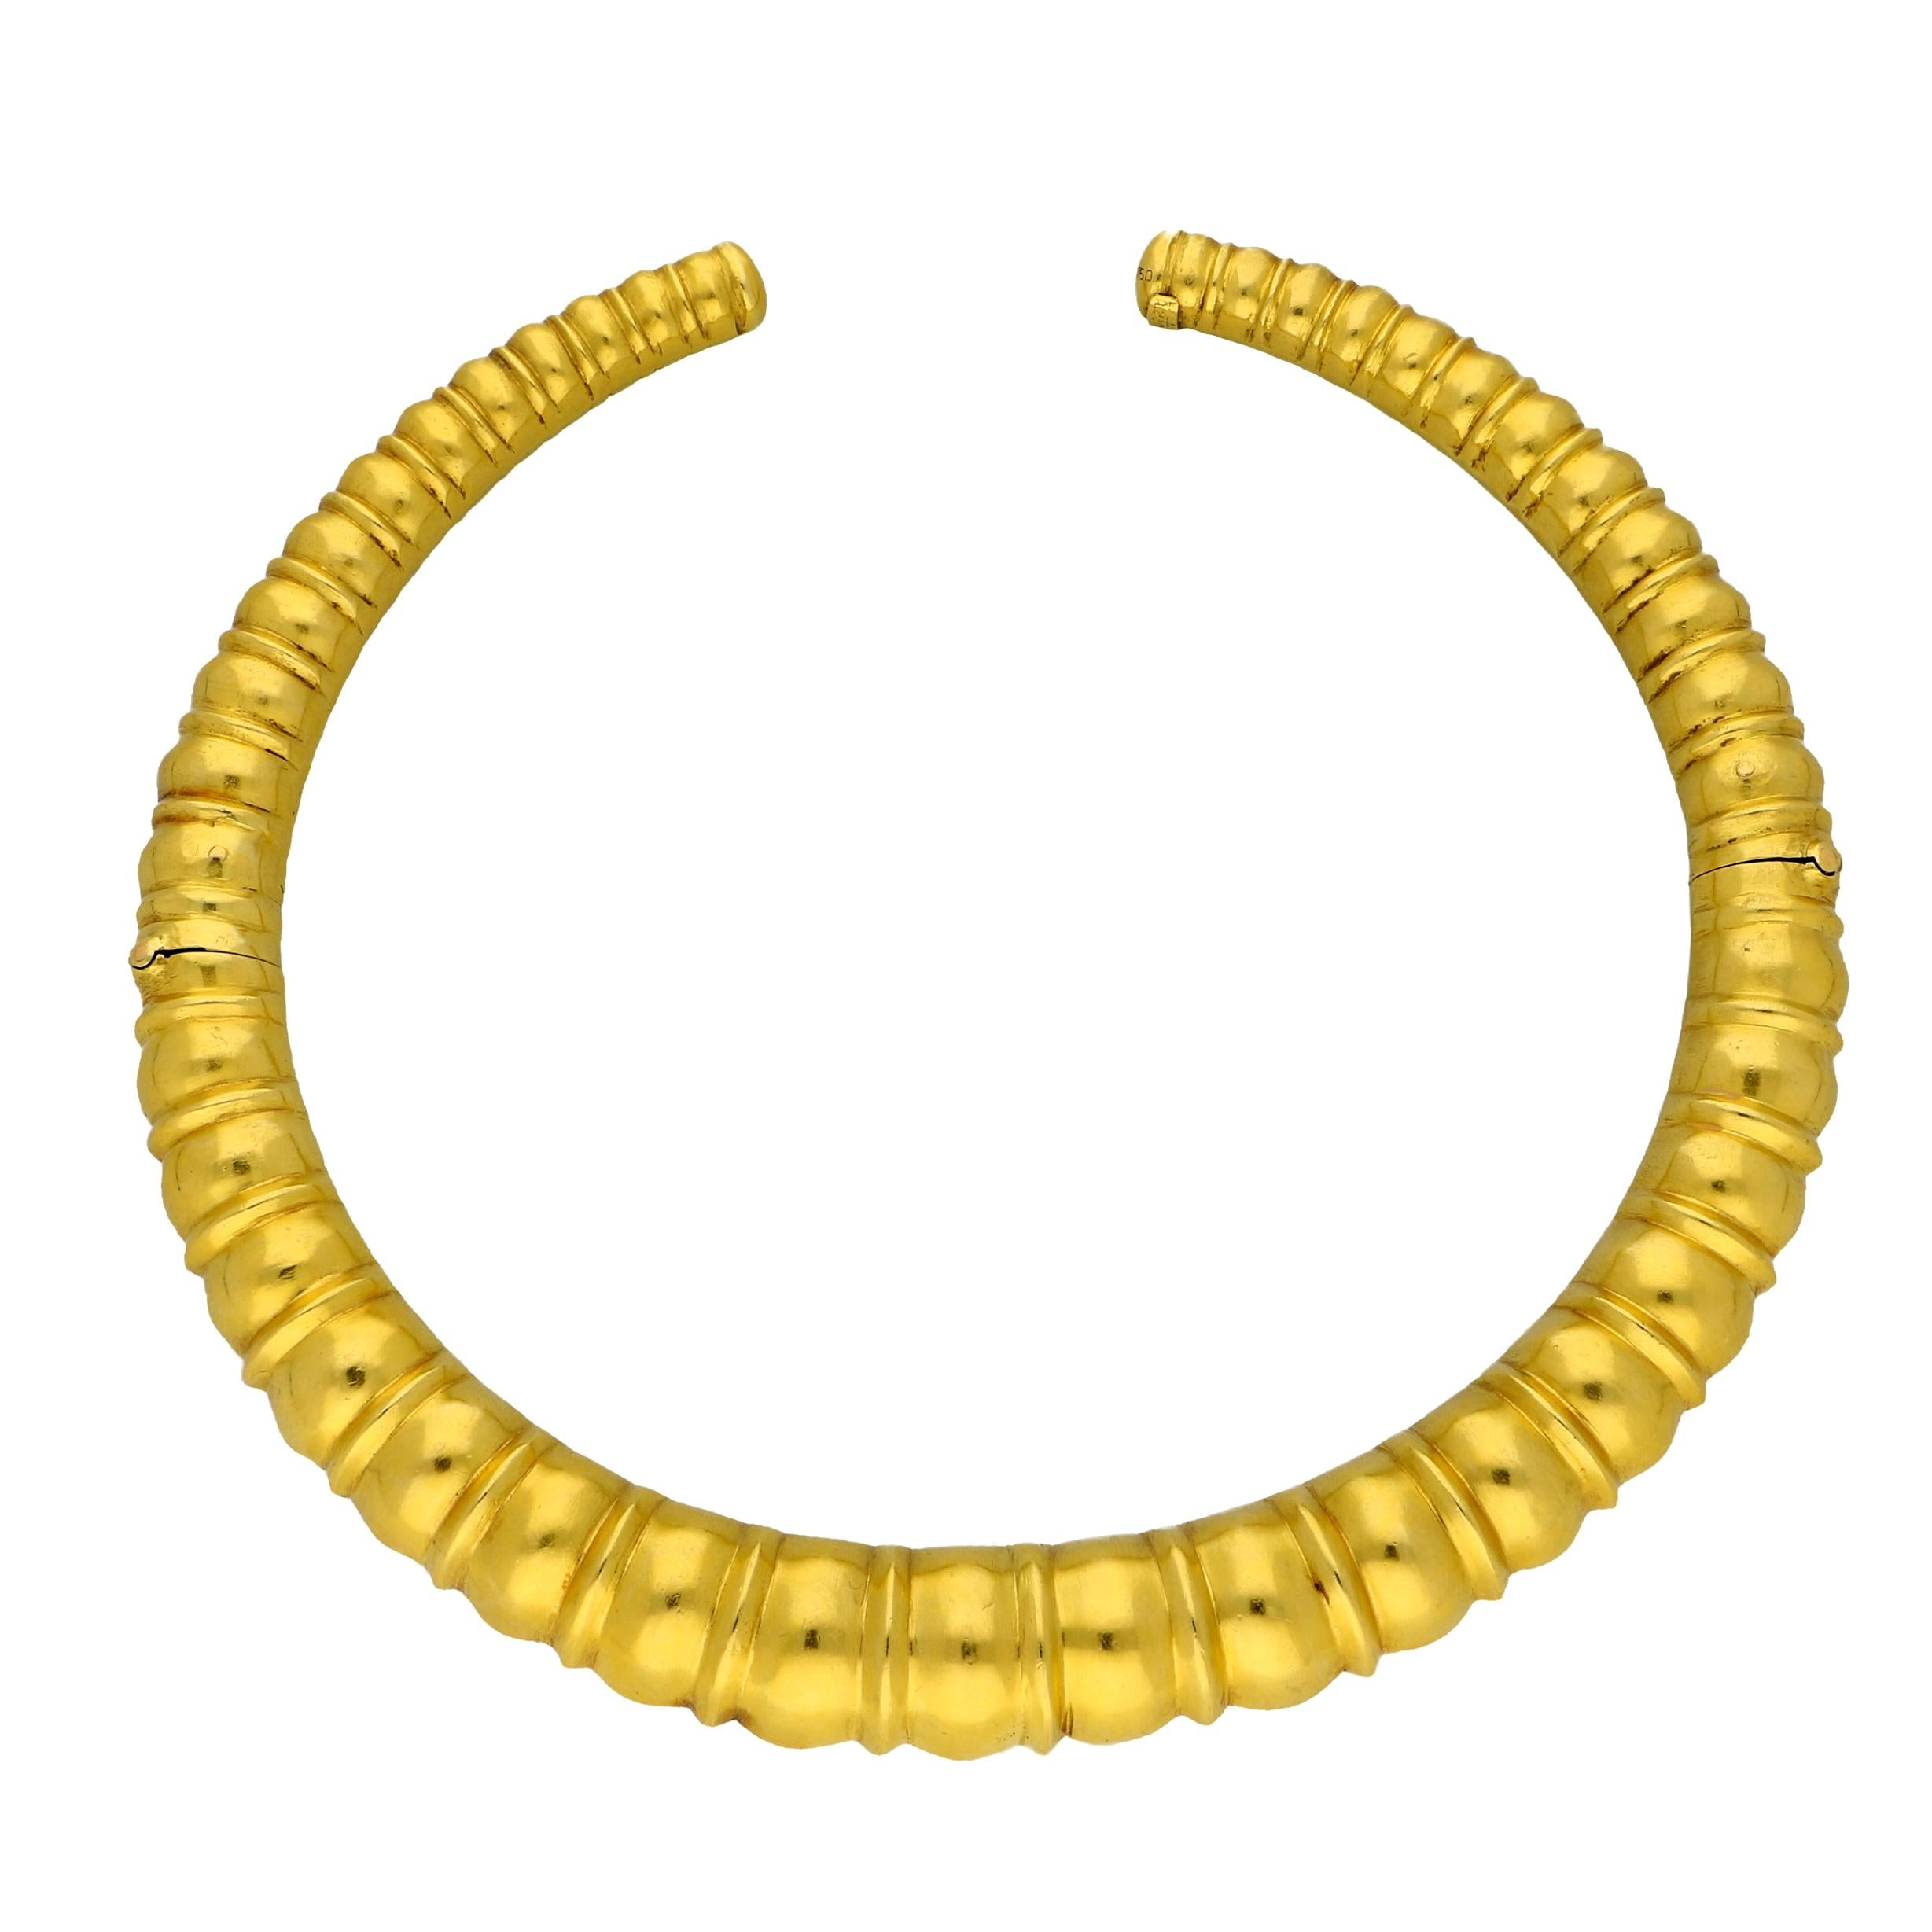 Women's or Men's Ilias Lalaounis 18 Carat Yellow Gold Torque Necklace of Ribbed Beaded Design